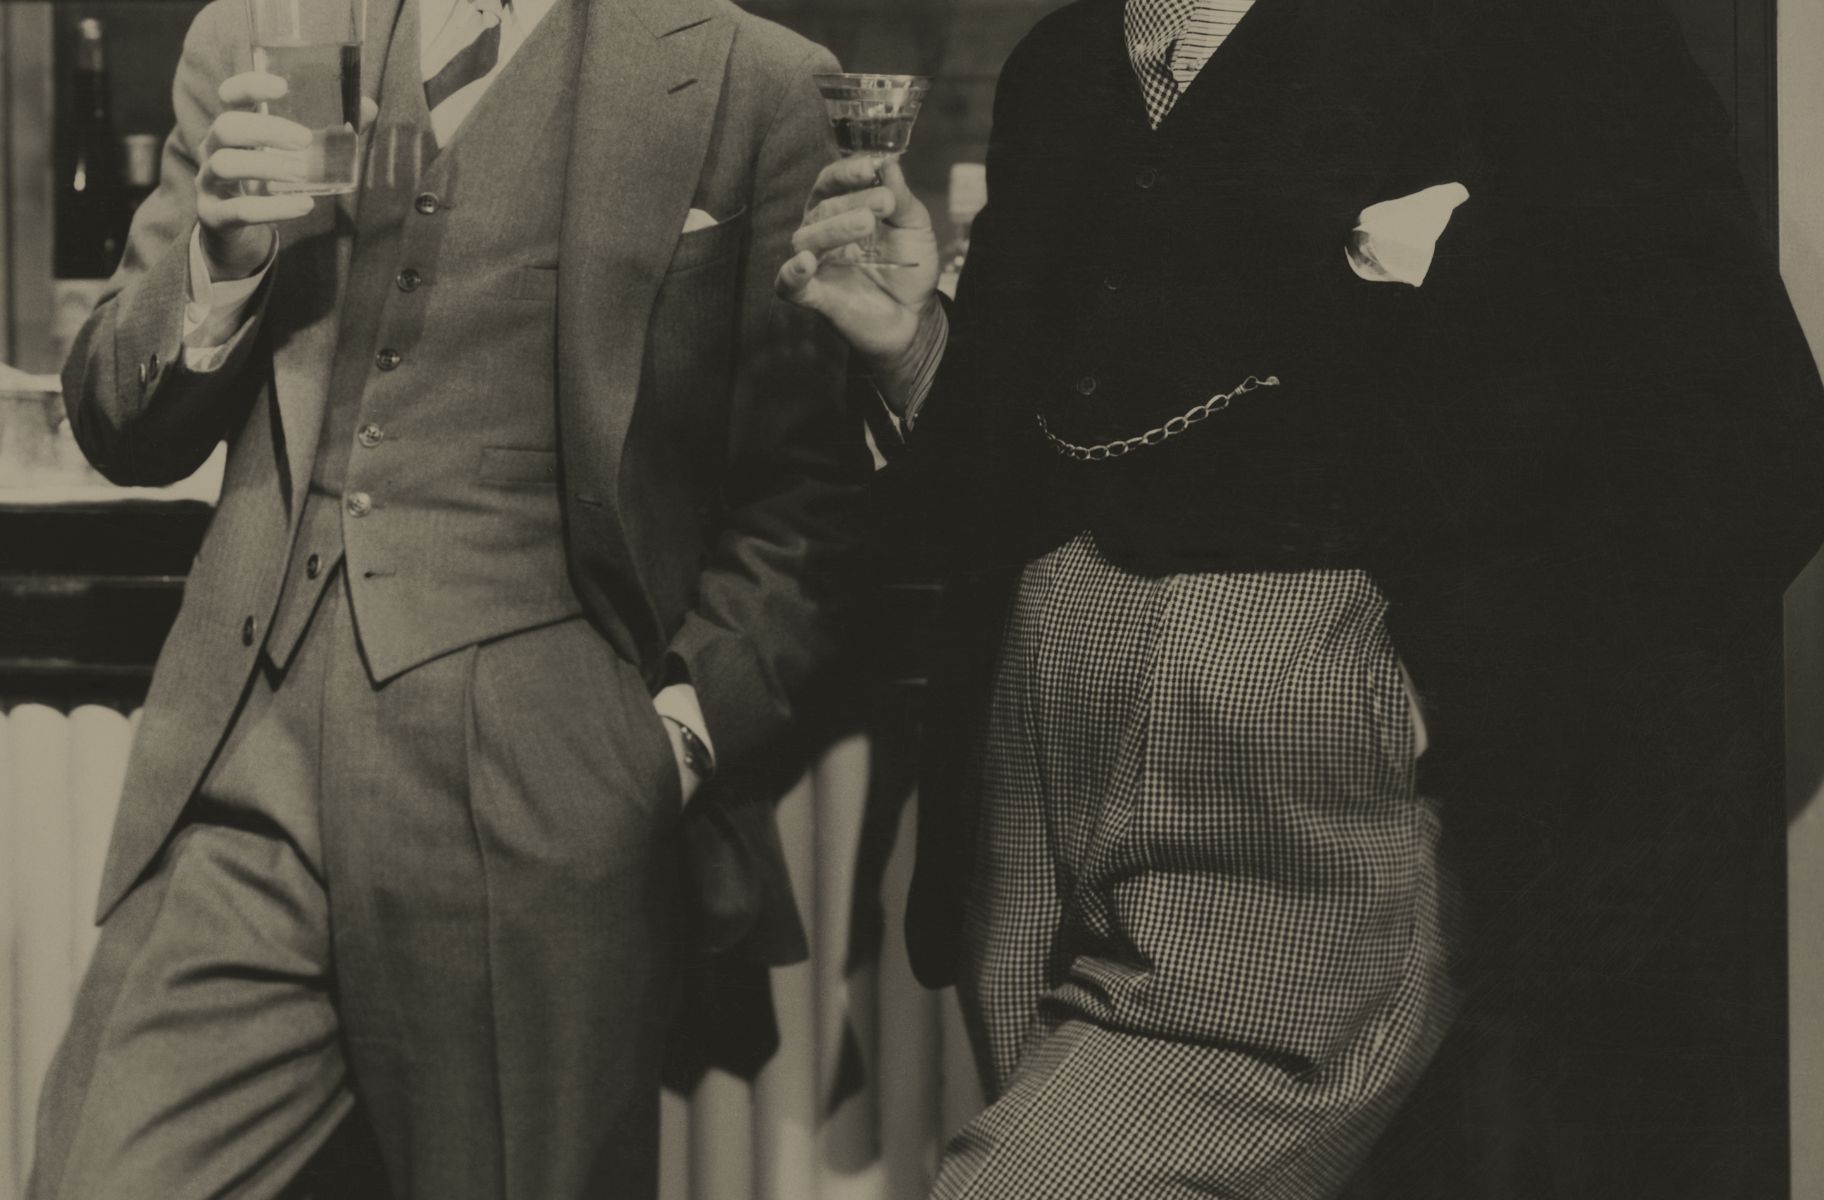 Two men in 1930s attire with drinks in hand 